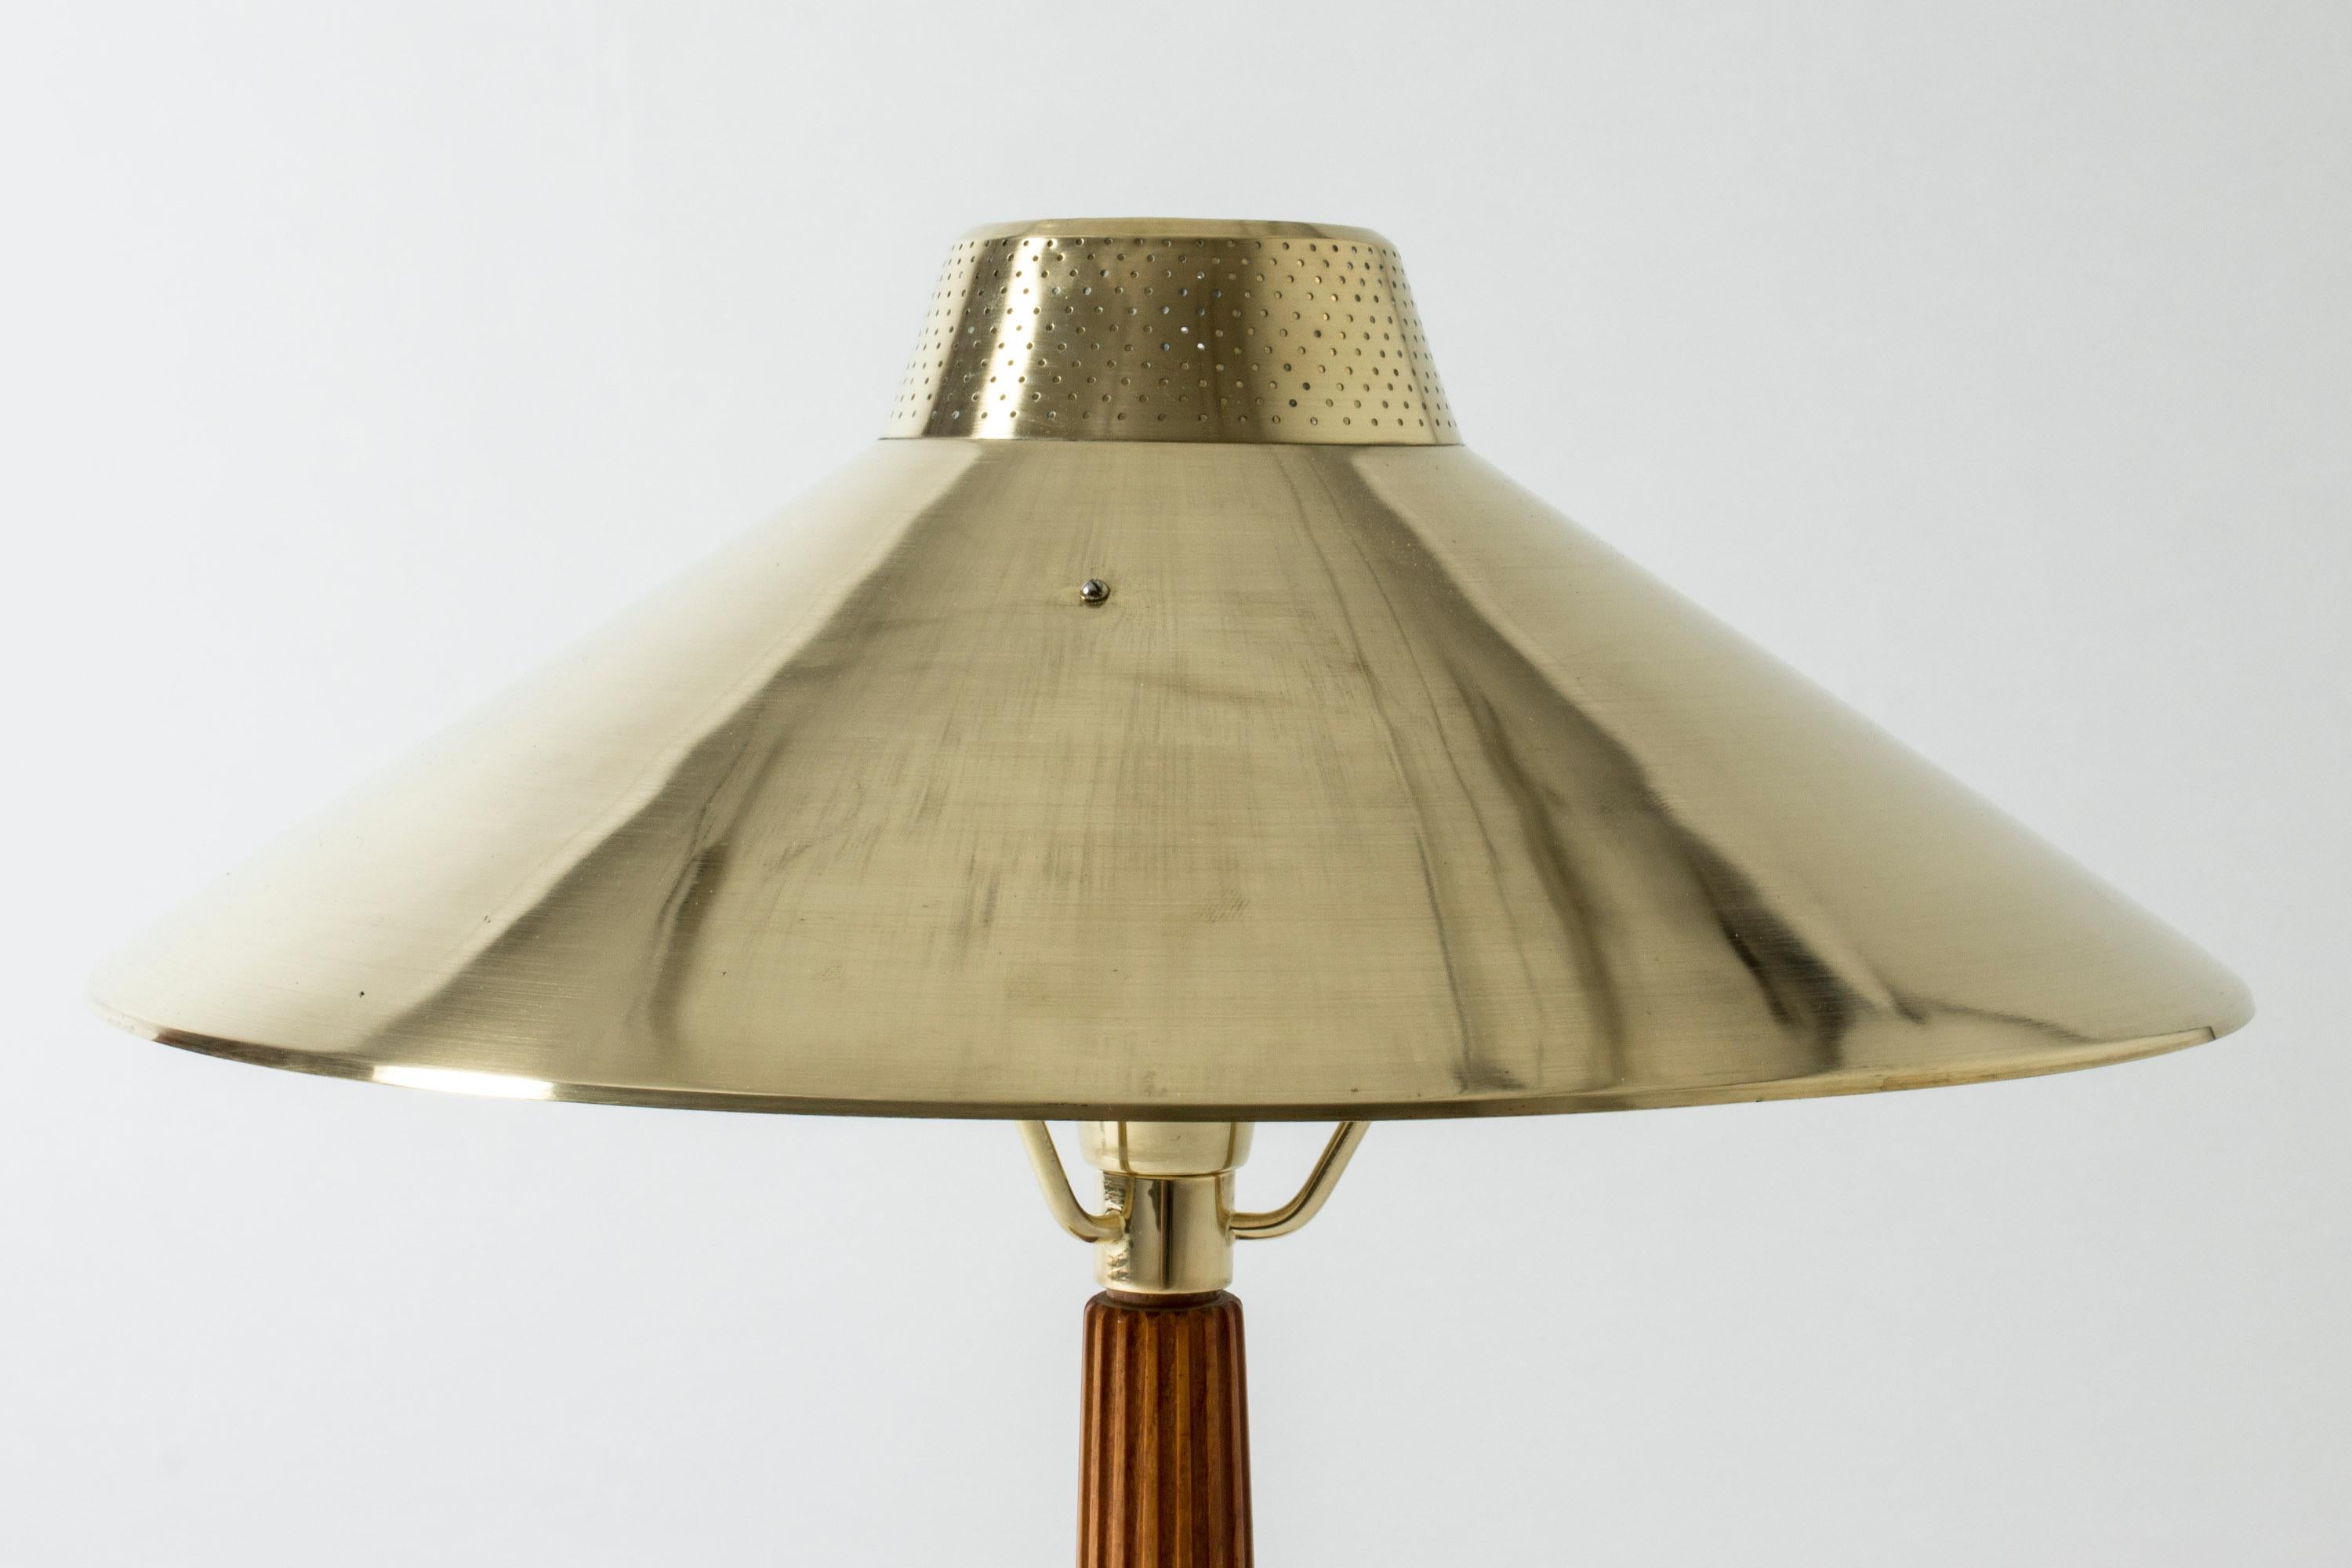 Elegant brass table lamp by Hans Bergström, with a large shade. Shade perforated with tiny holes around the top, creating a warm glow. Mahogany handle with embossed stripes.